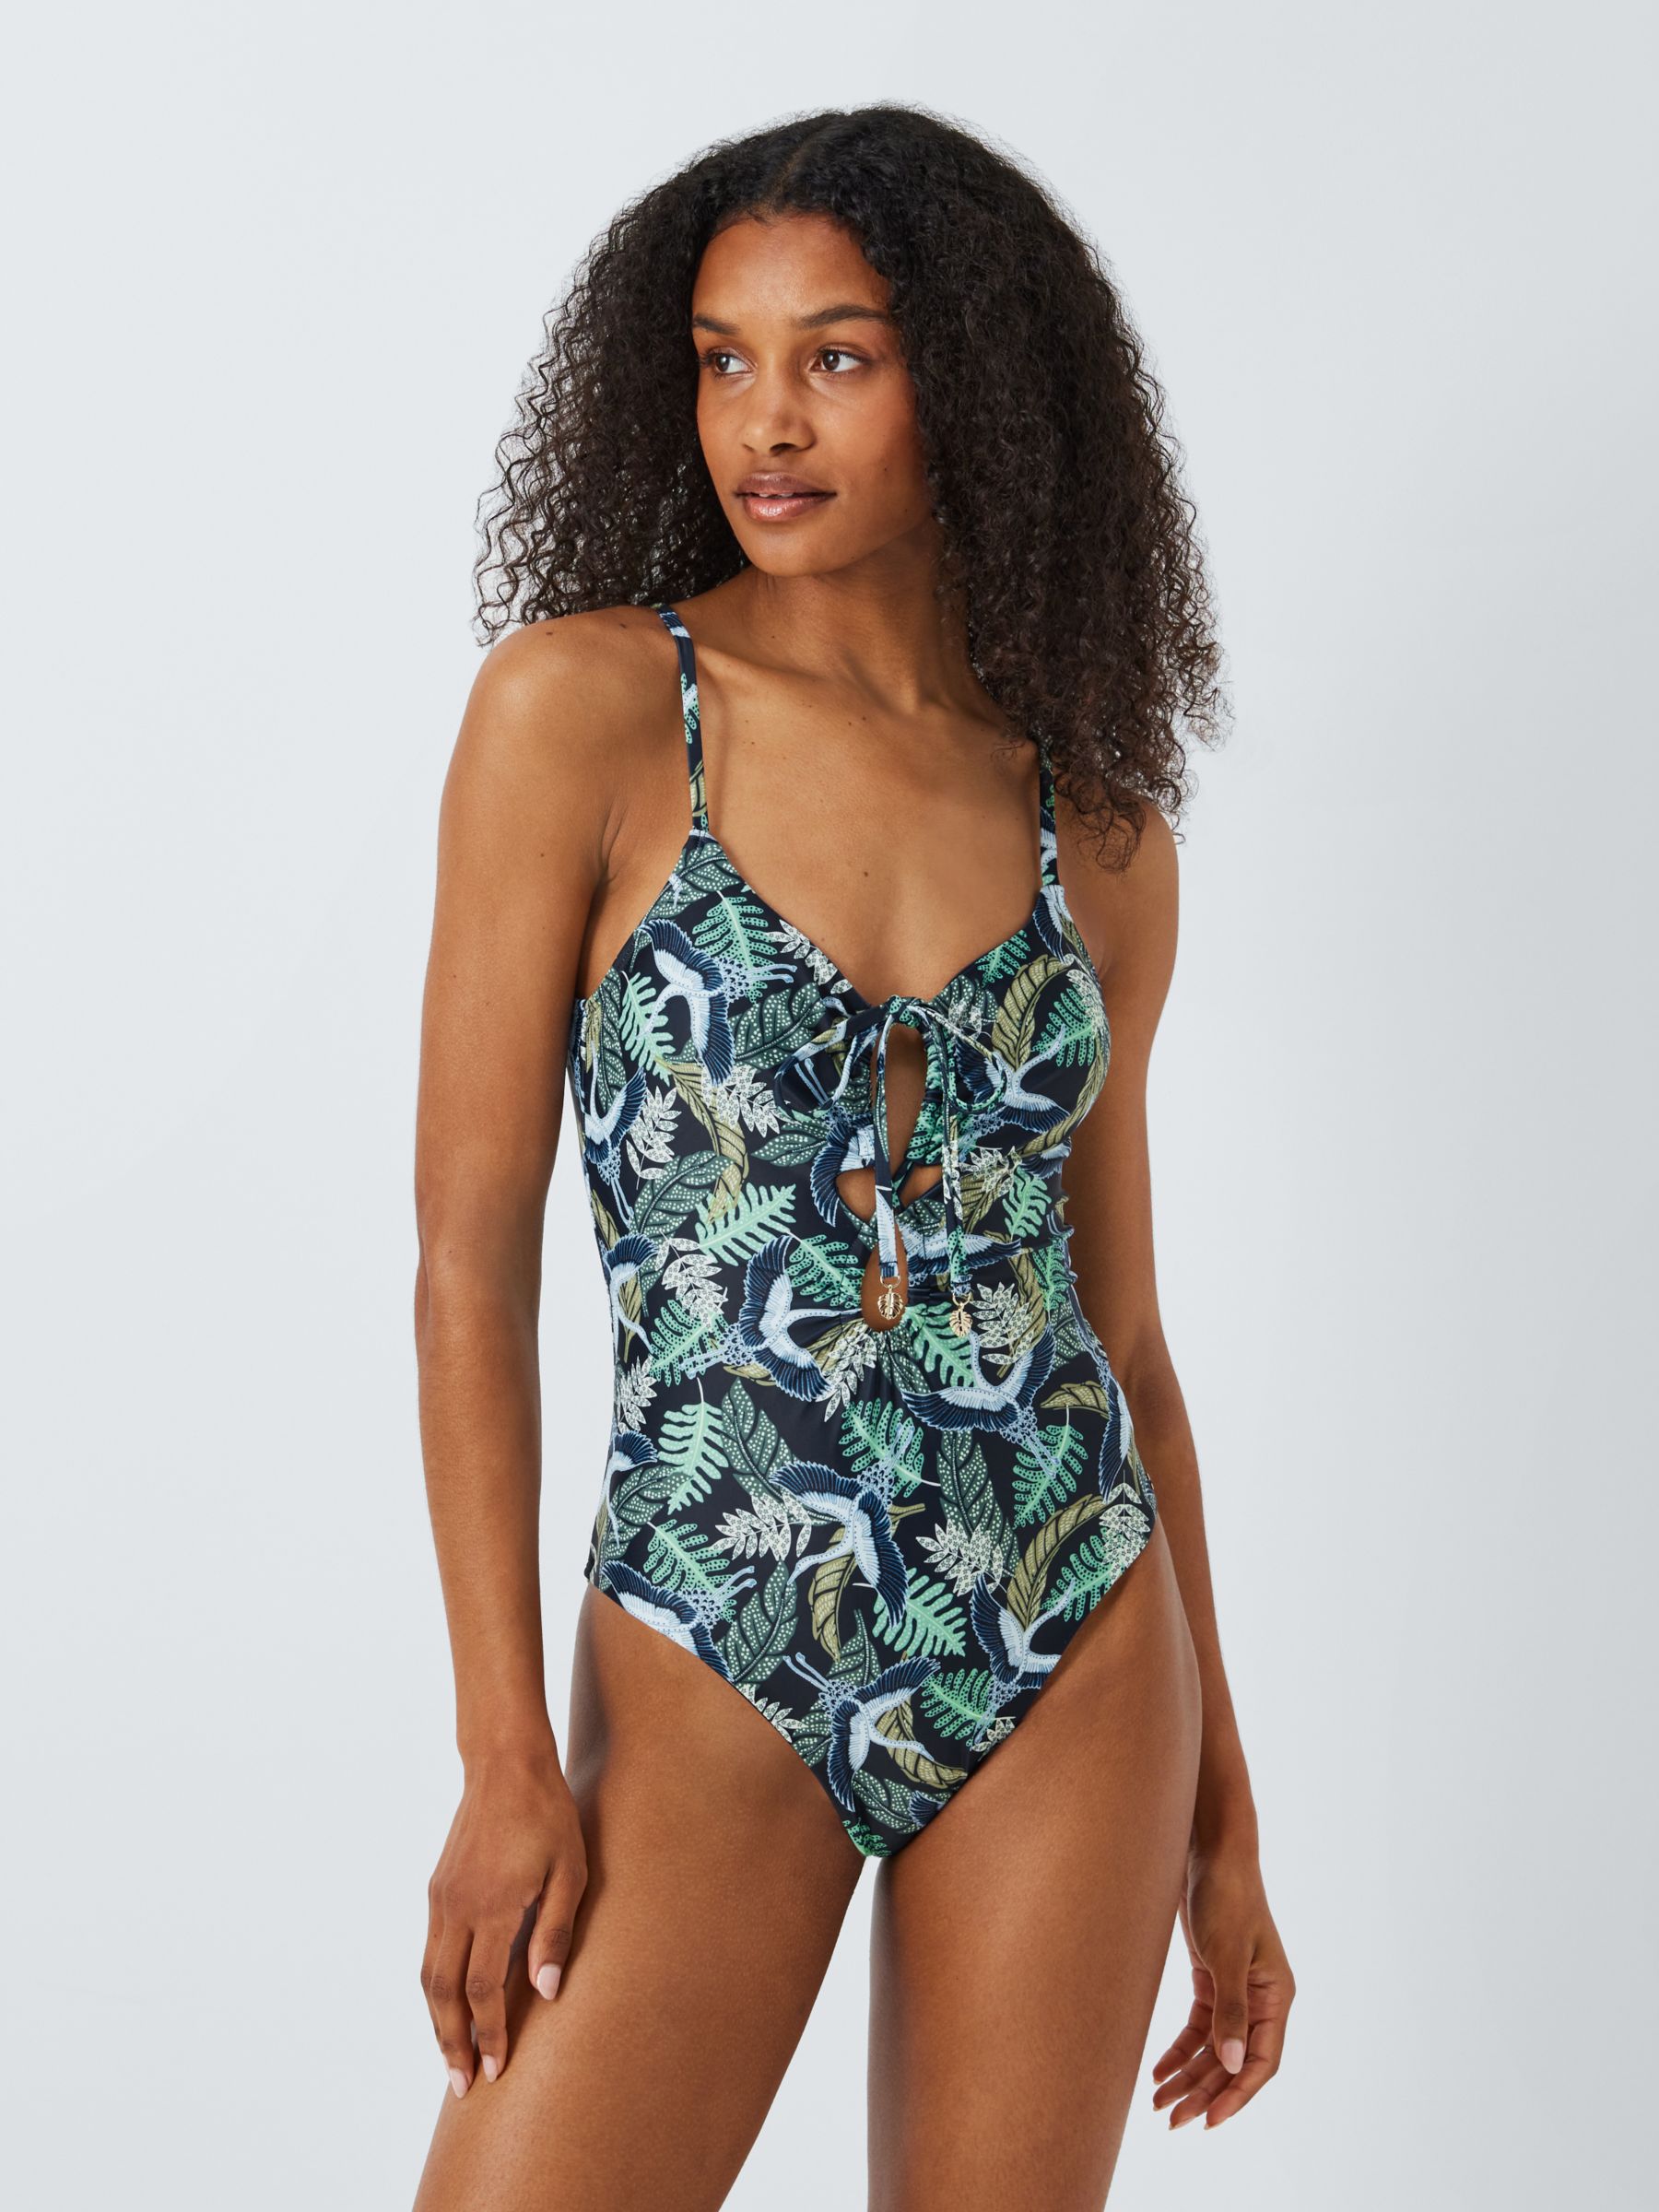 AND/OR Botanical Print Swimsuit, Navy/Multi, 18